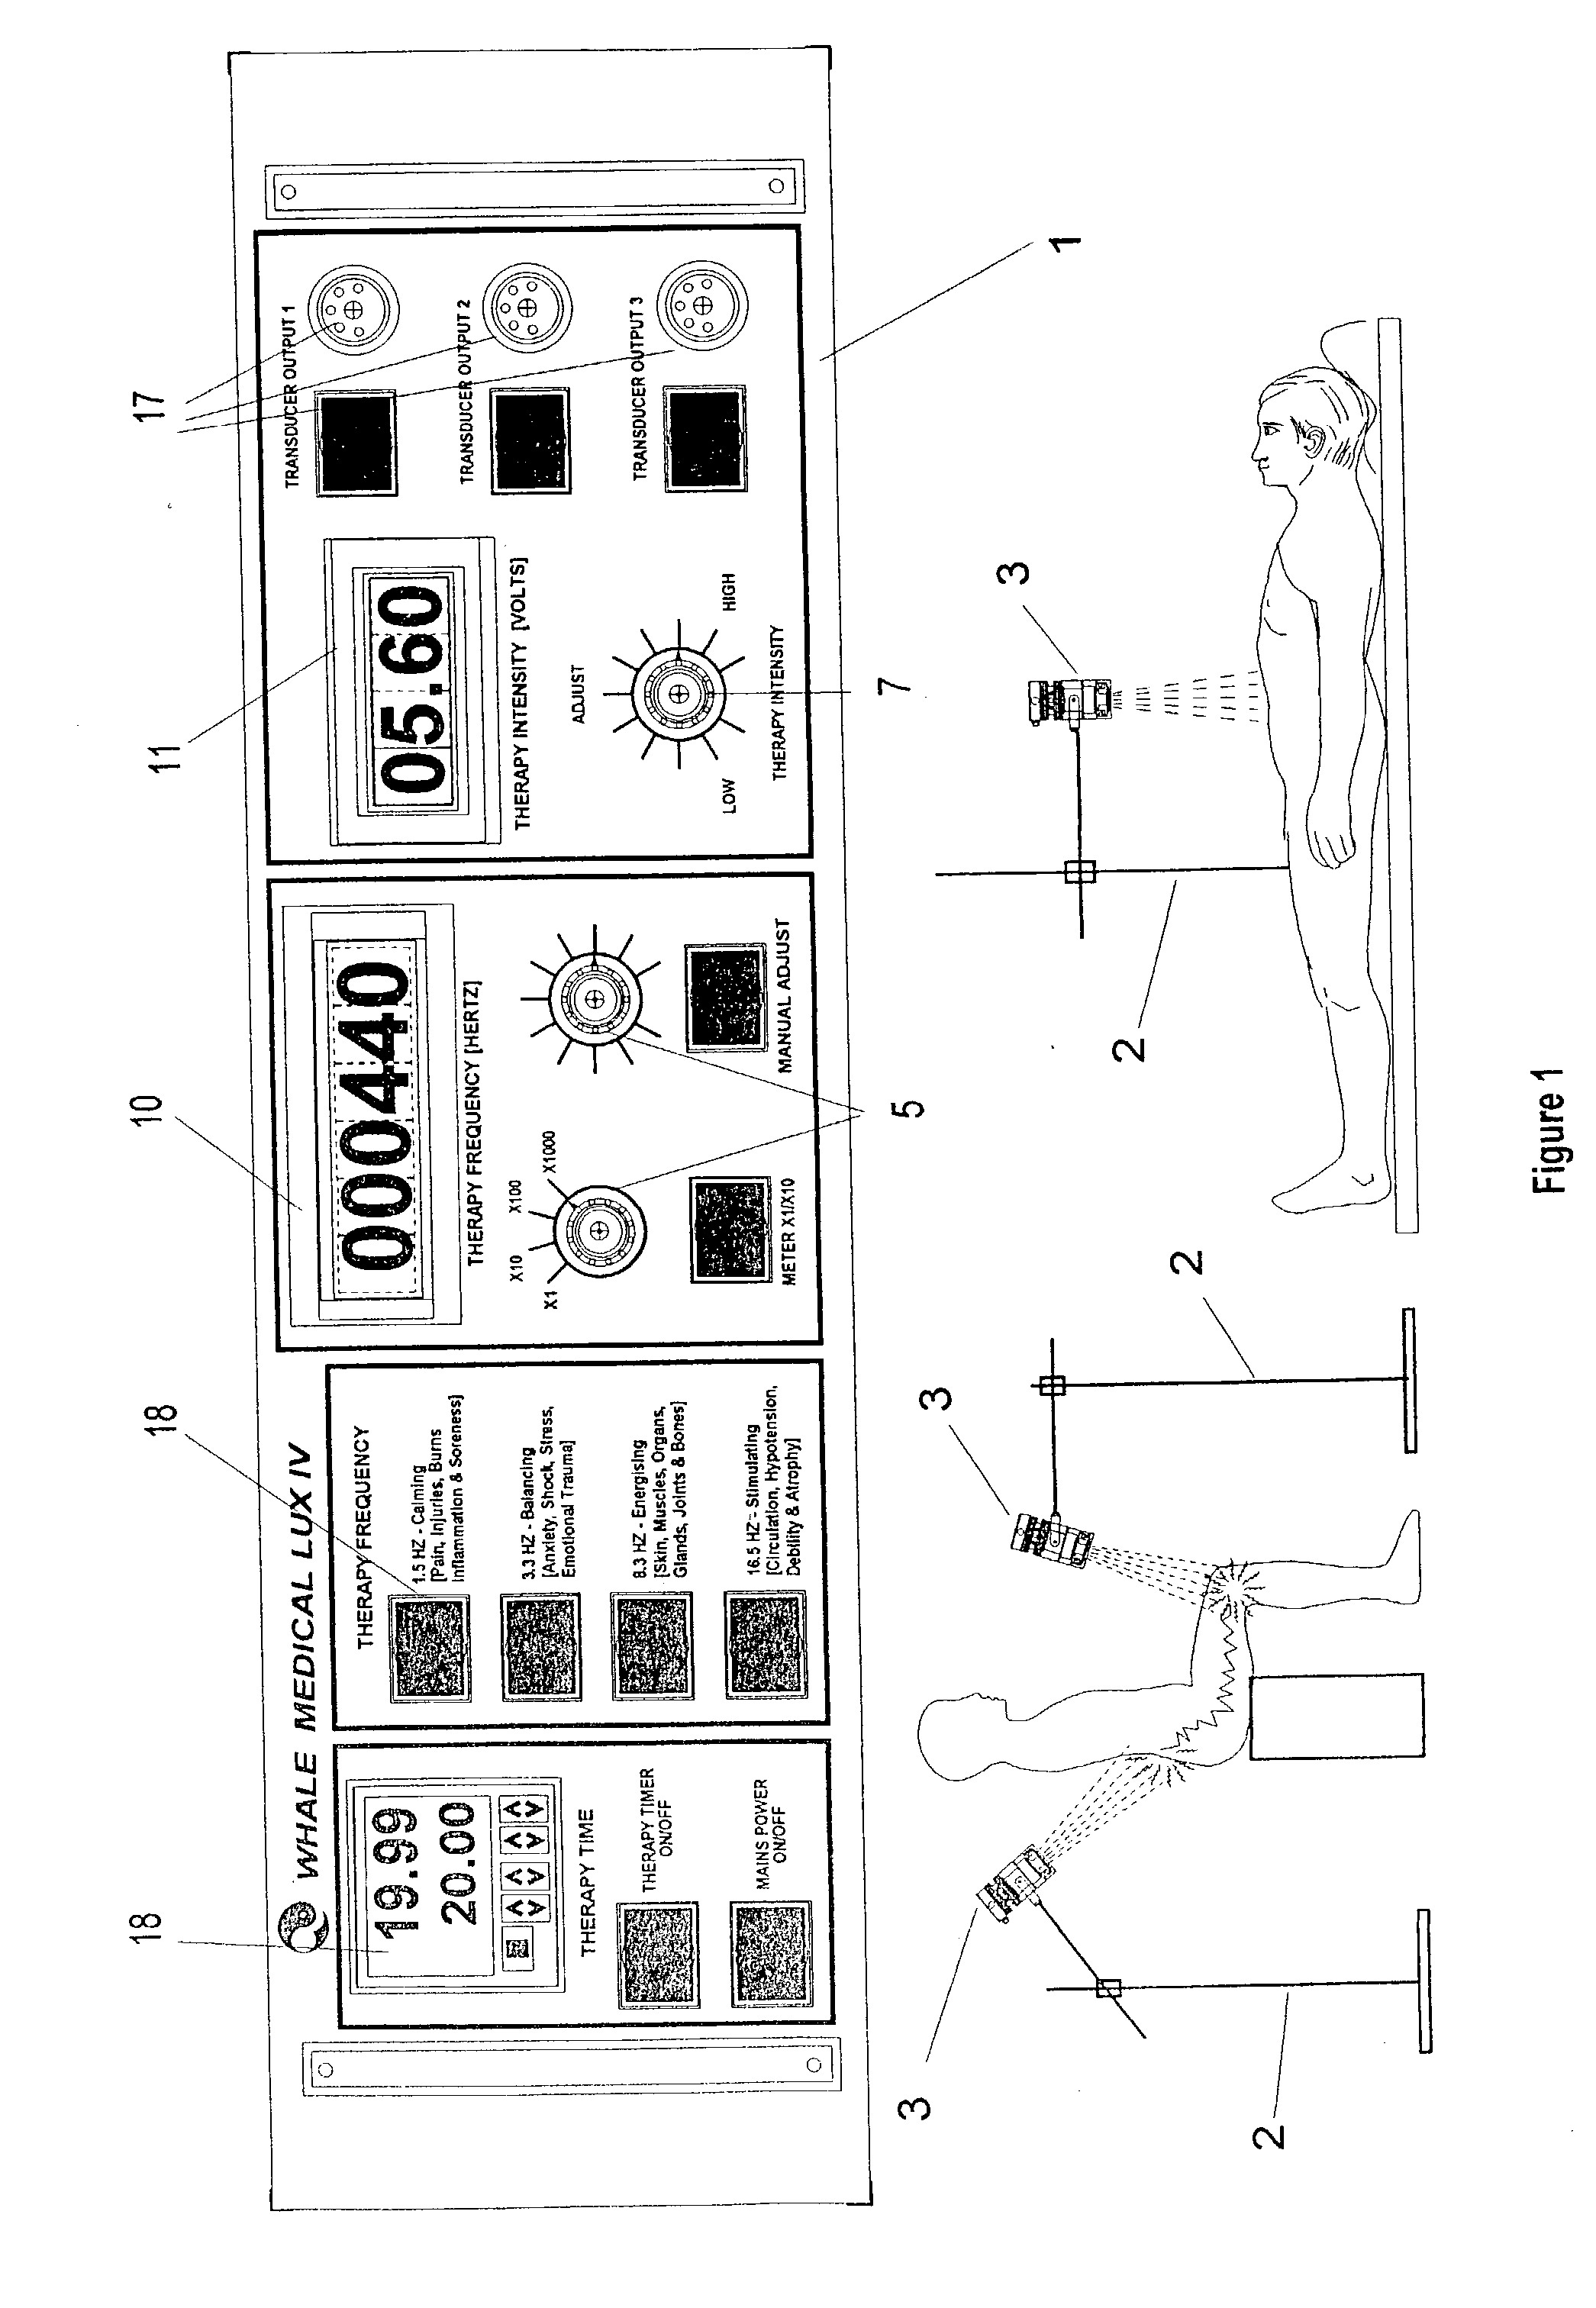 Medical therapy apparatus